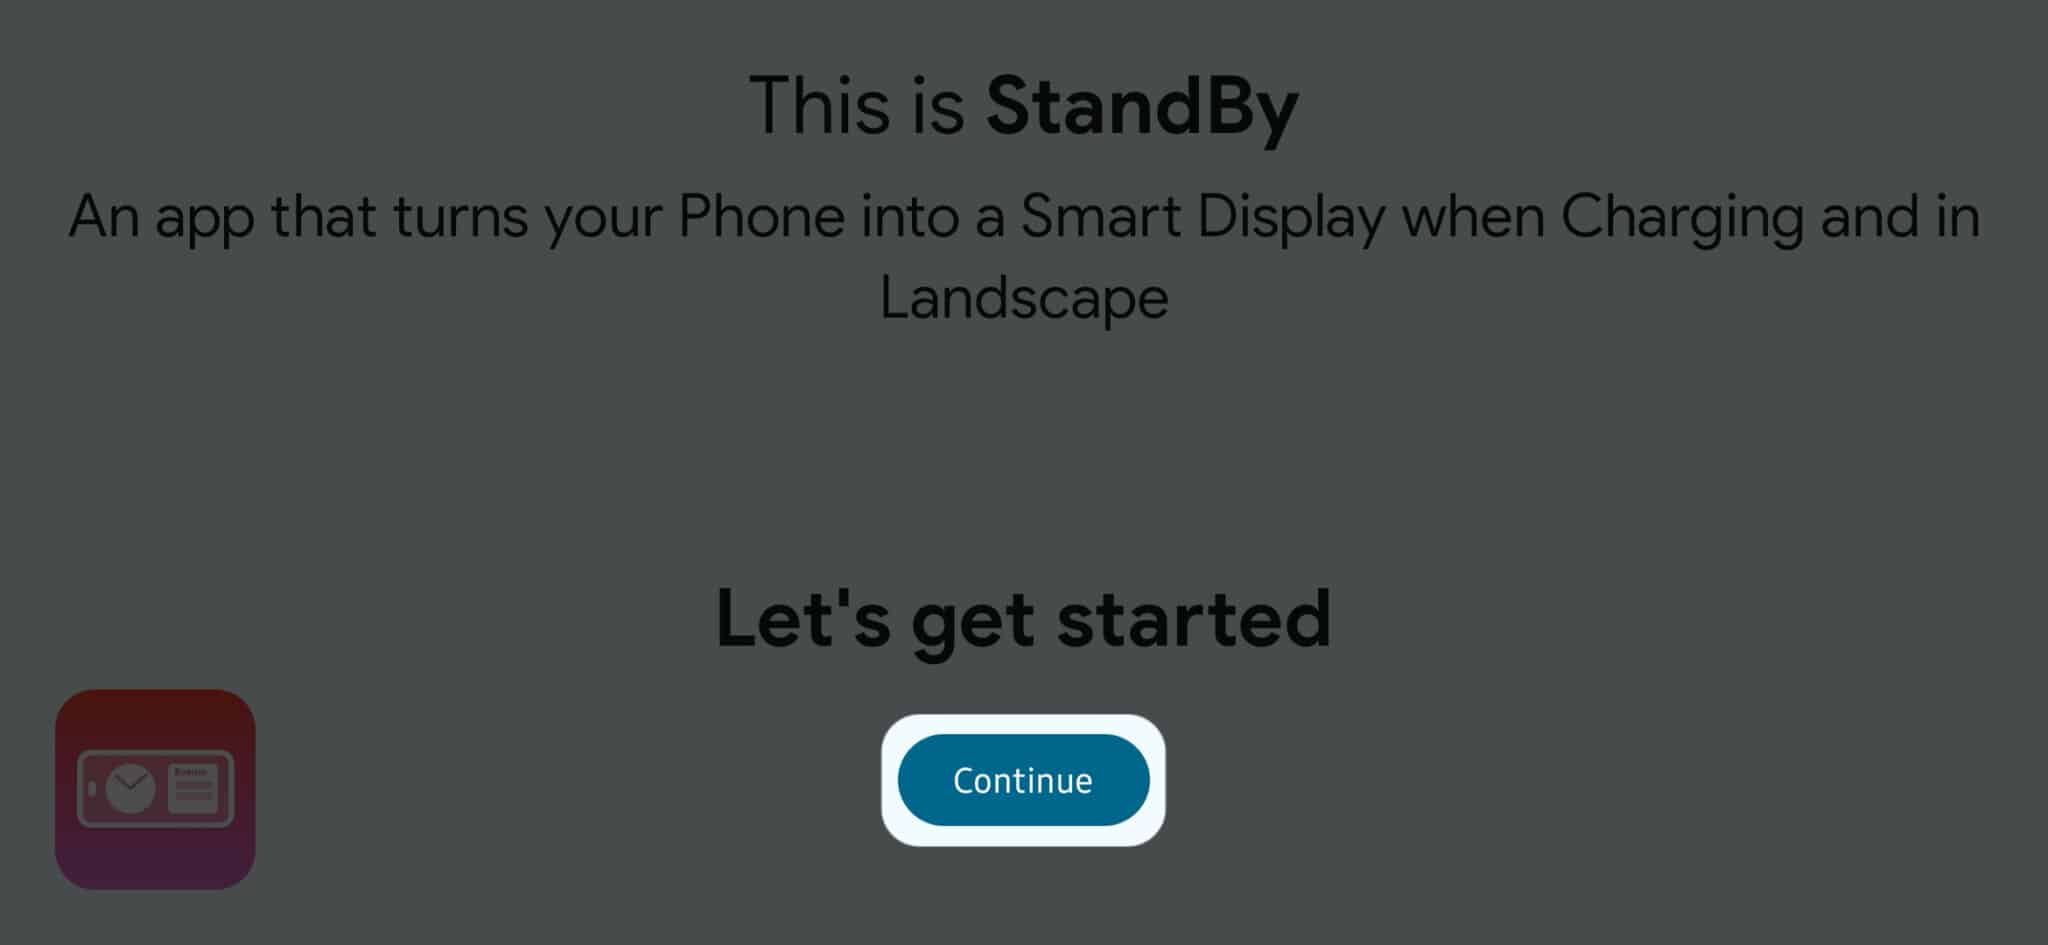 tap-continue-in-standby-mode-pro-app-on-android-scaled